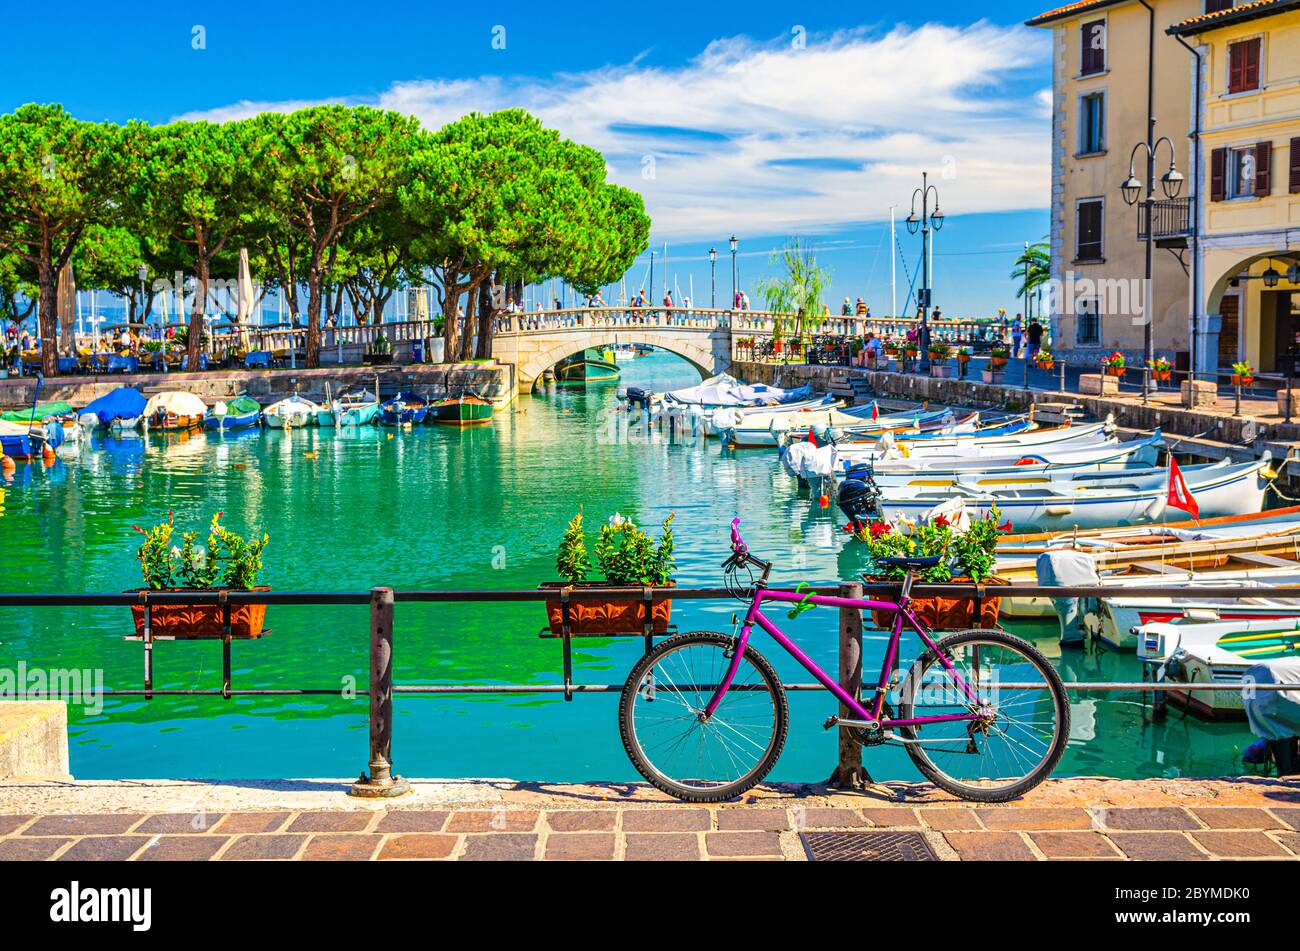 Bicycle bike near fence of old harbour Porto Vecchio with motor boats on turquoise water and Venetian bridge in historical centre of Desenzano del Garda town, blue sky, Lombardy, Northern Italy Stock Photo